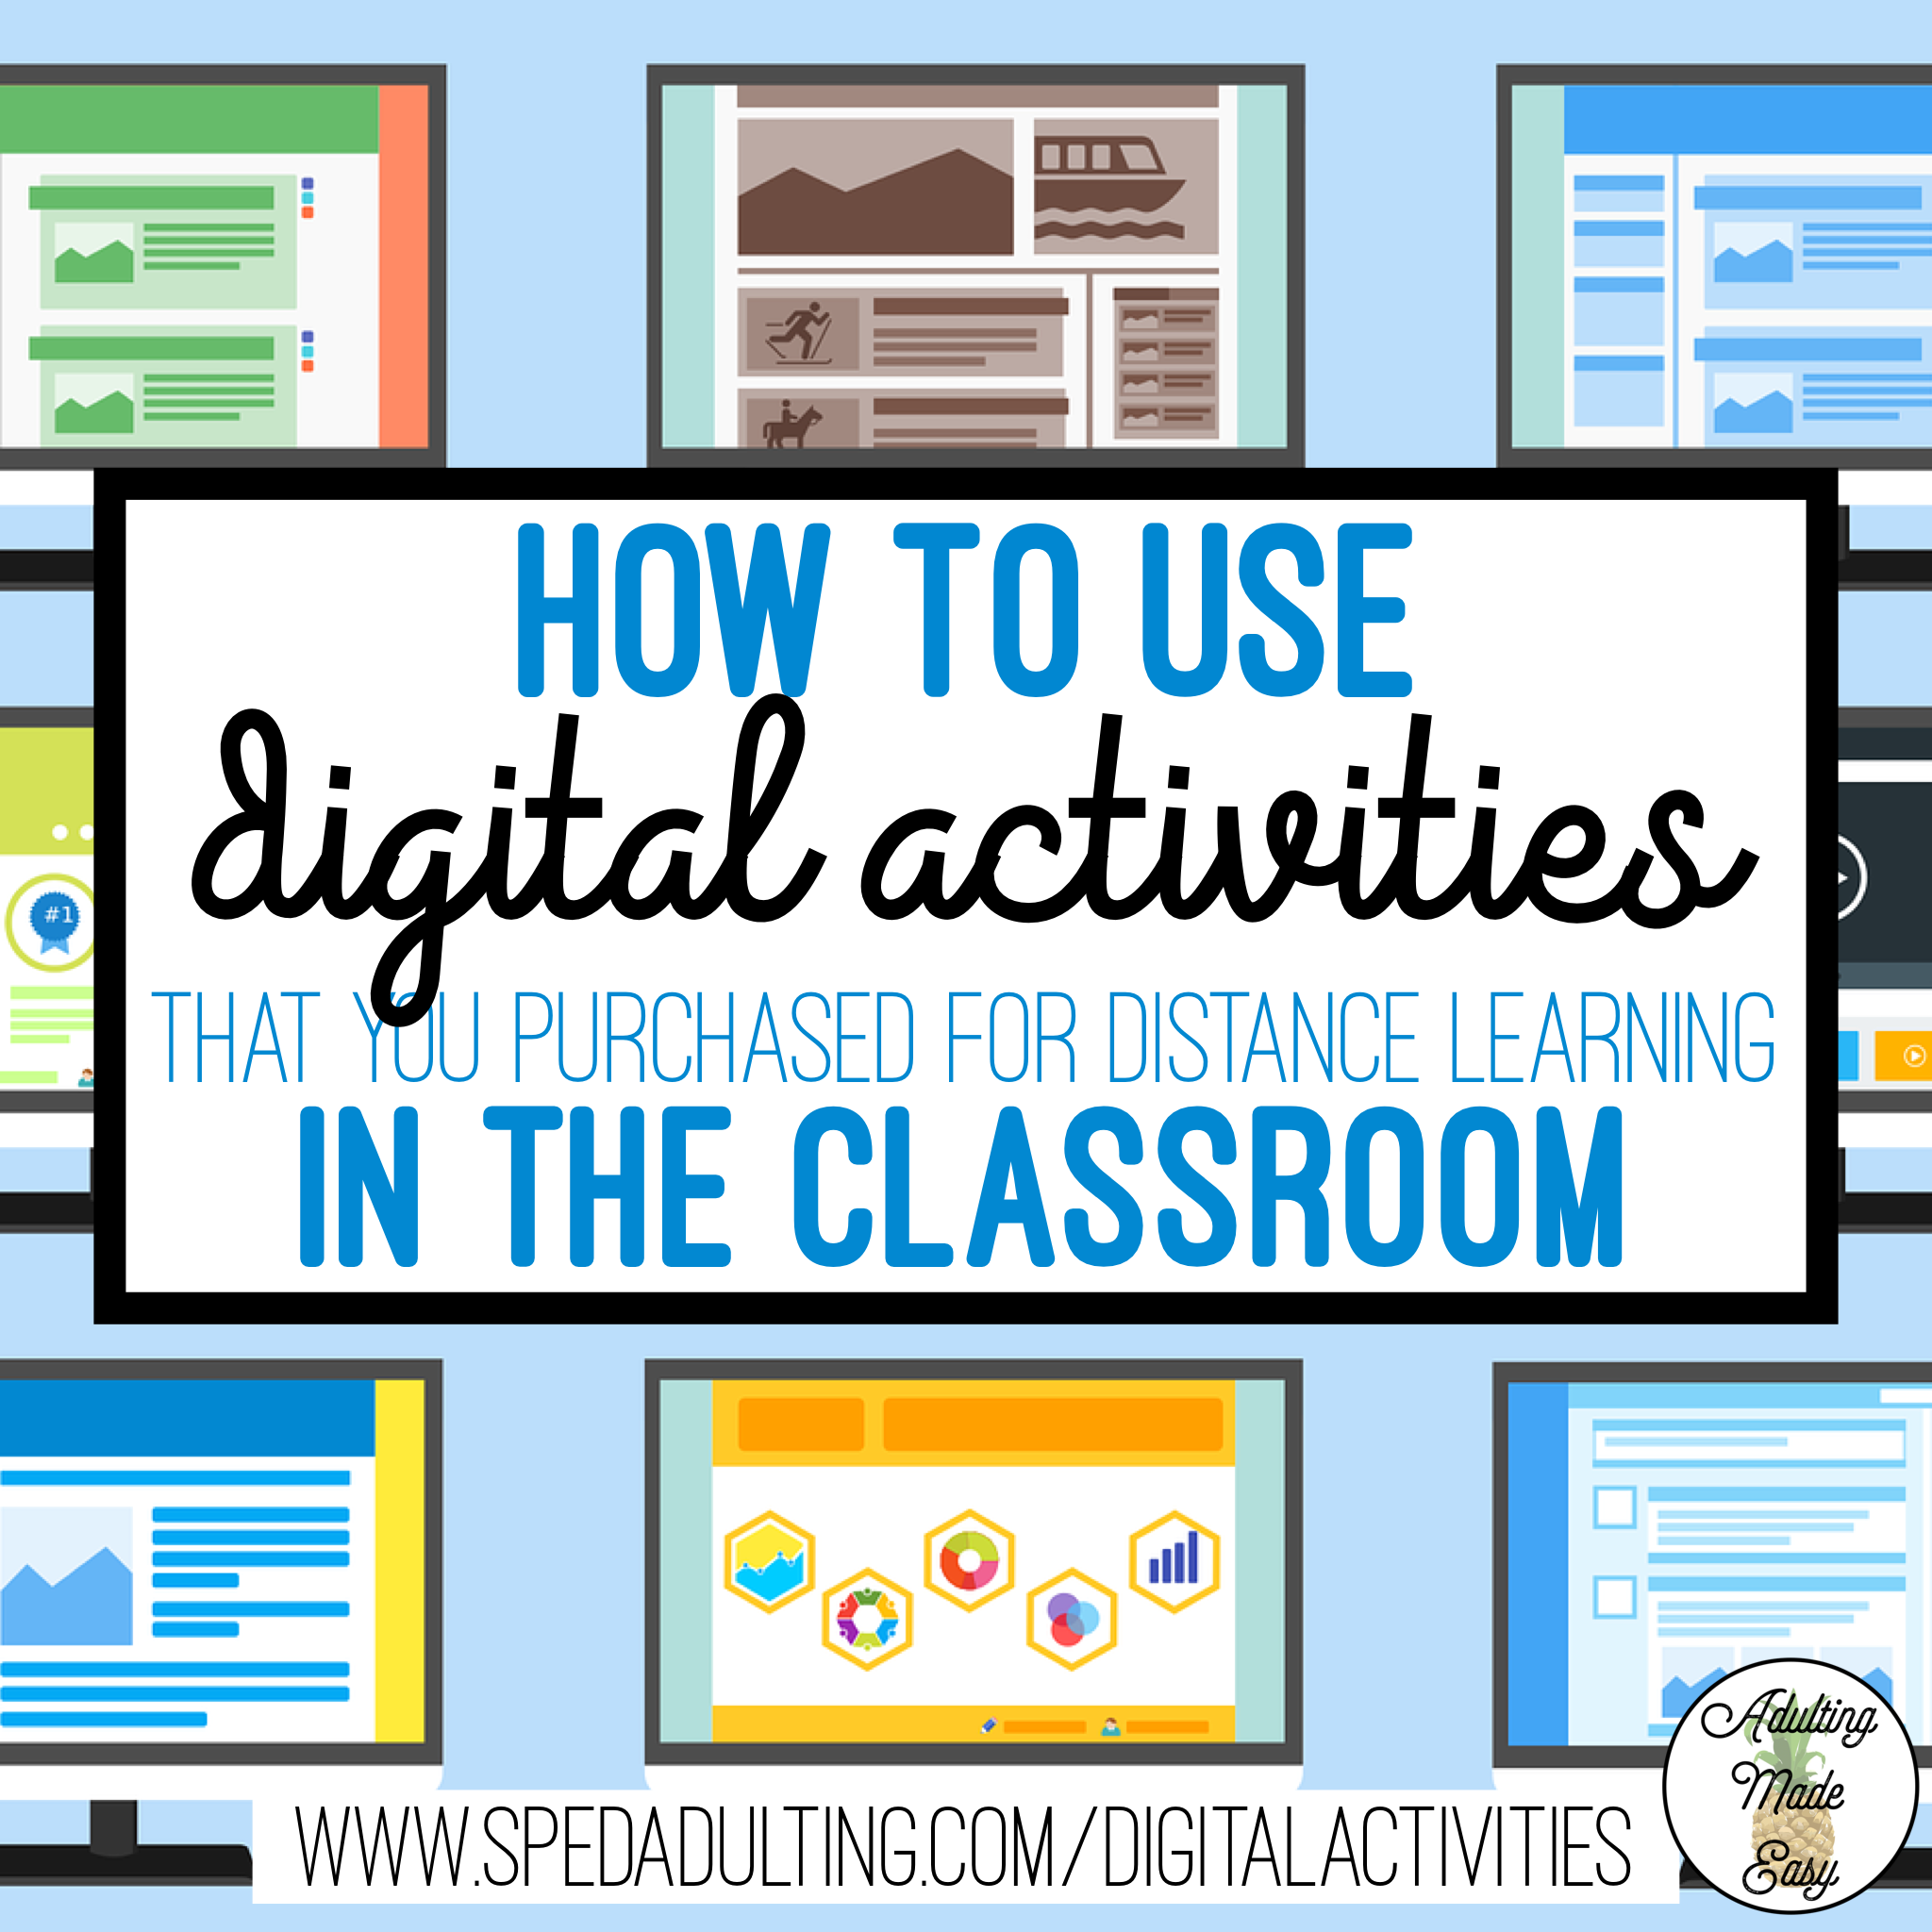 How to use digital activities that you made or purchased for distance learing when you return to the classroom.